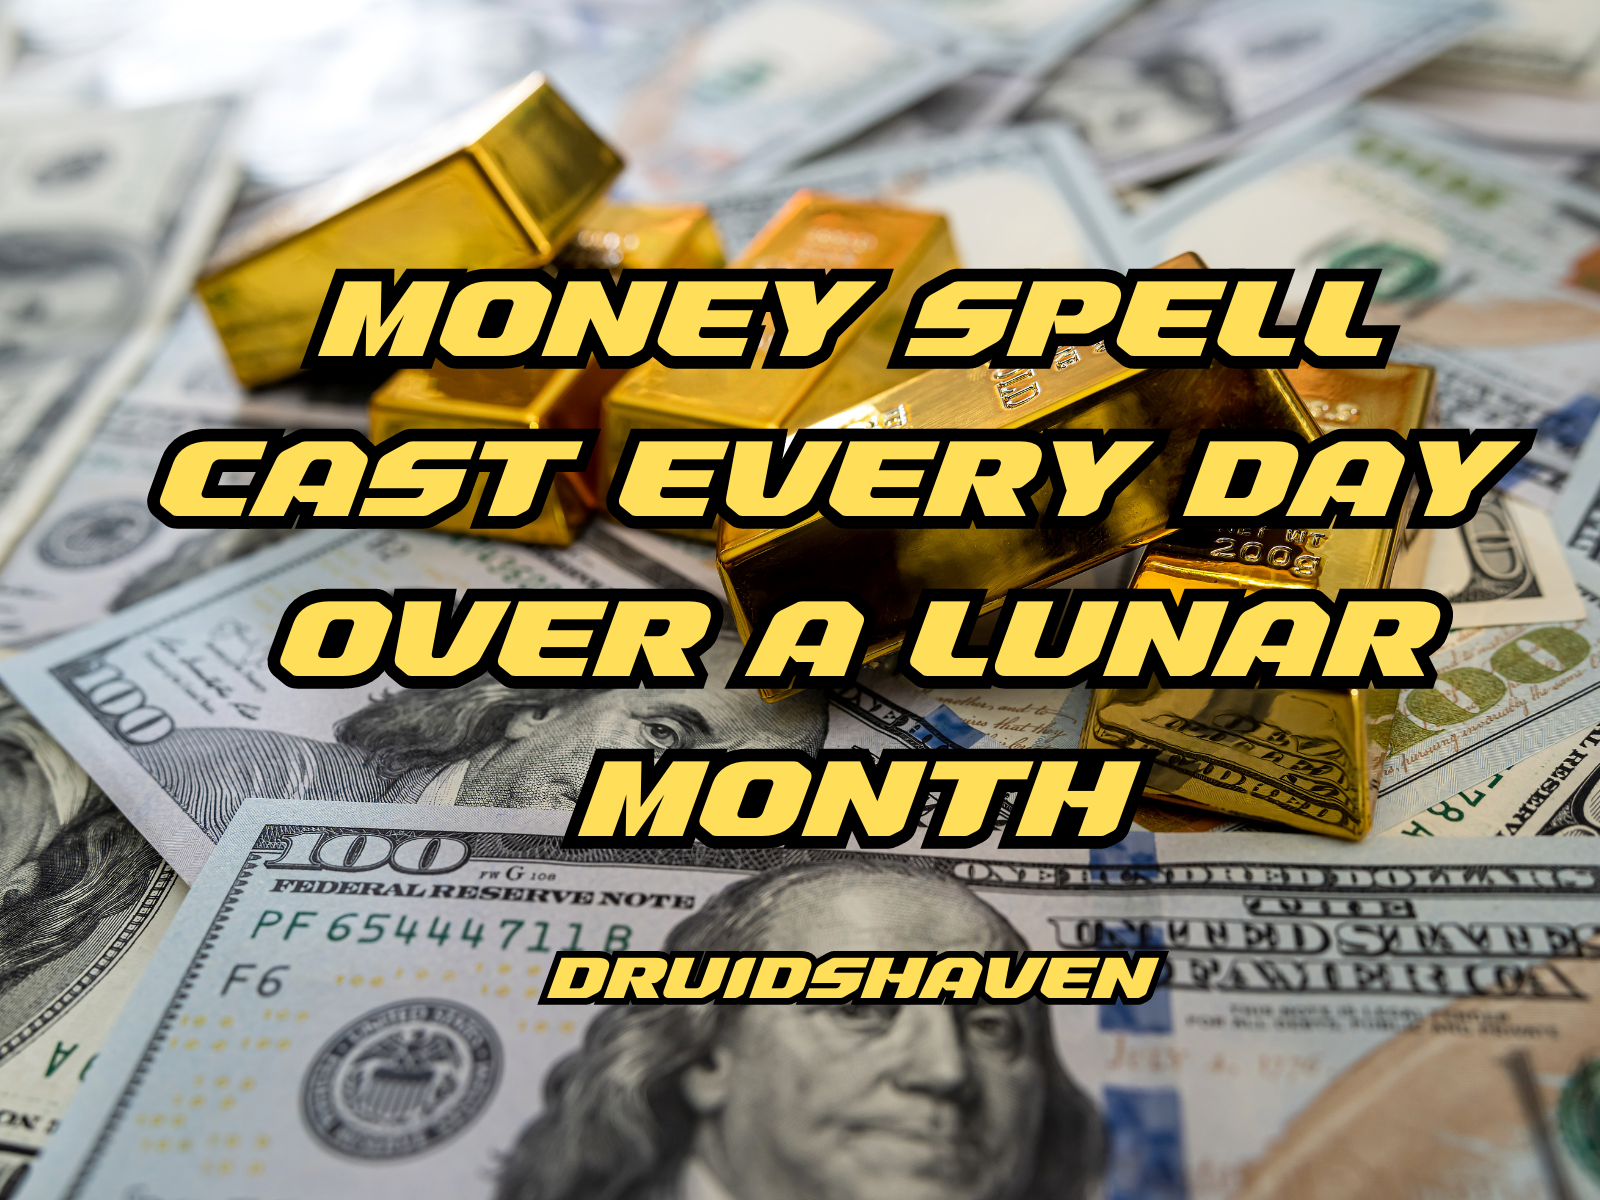 Primary image for Money Spell cast EVERY day for a lunar cycle using the millionaire ritual, magic